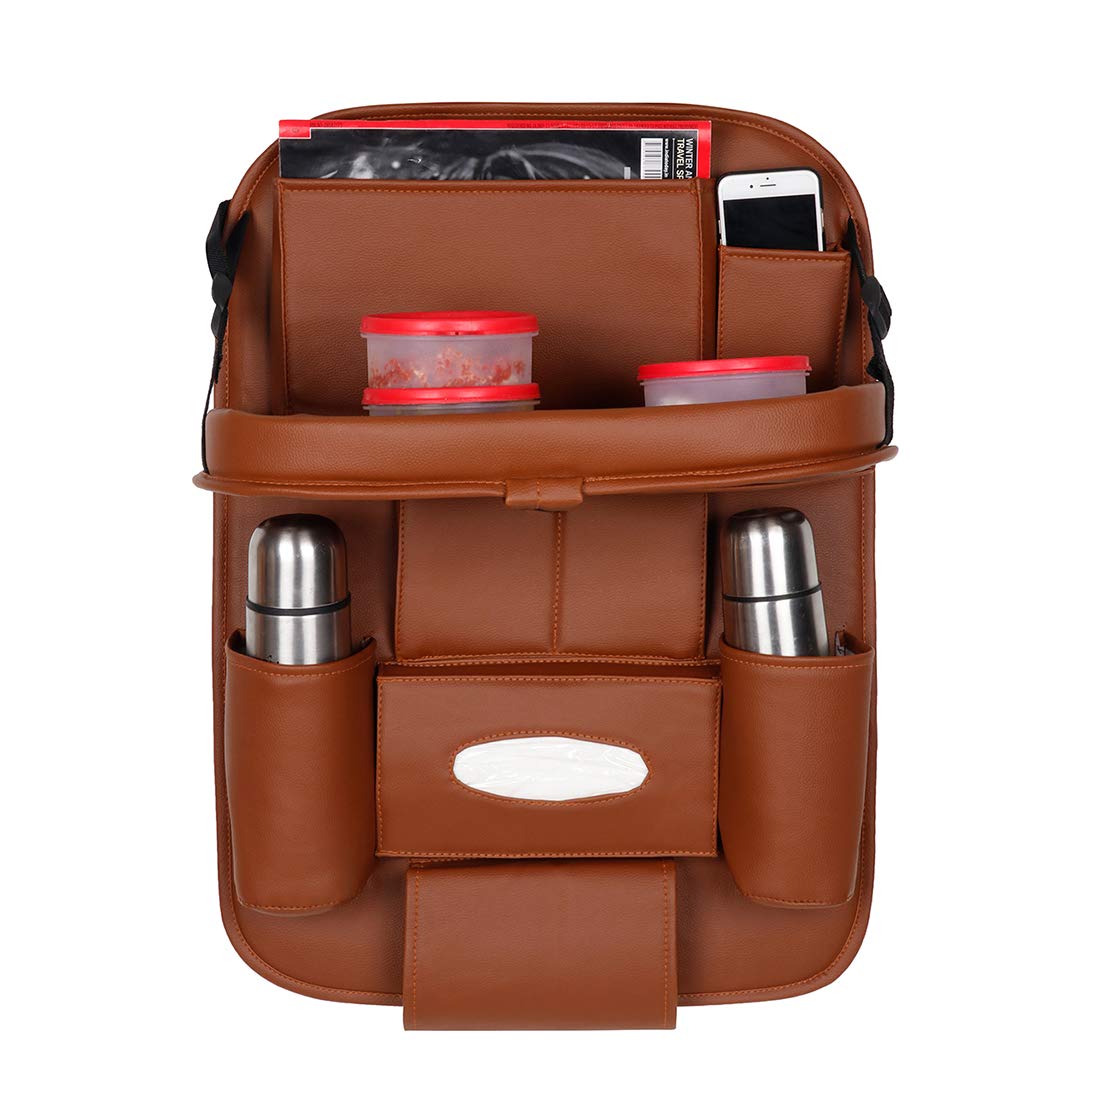 7D PREMIUM Car Seat Organizer  PU Leather with Folding Meal Tray and